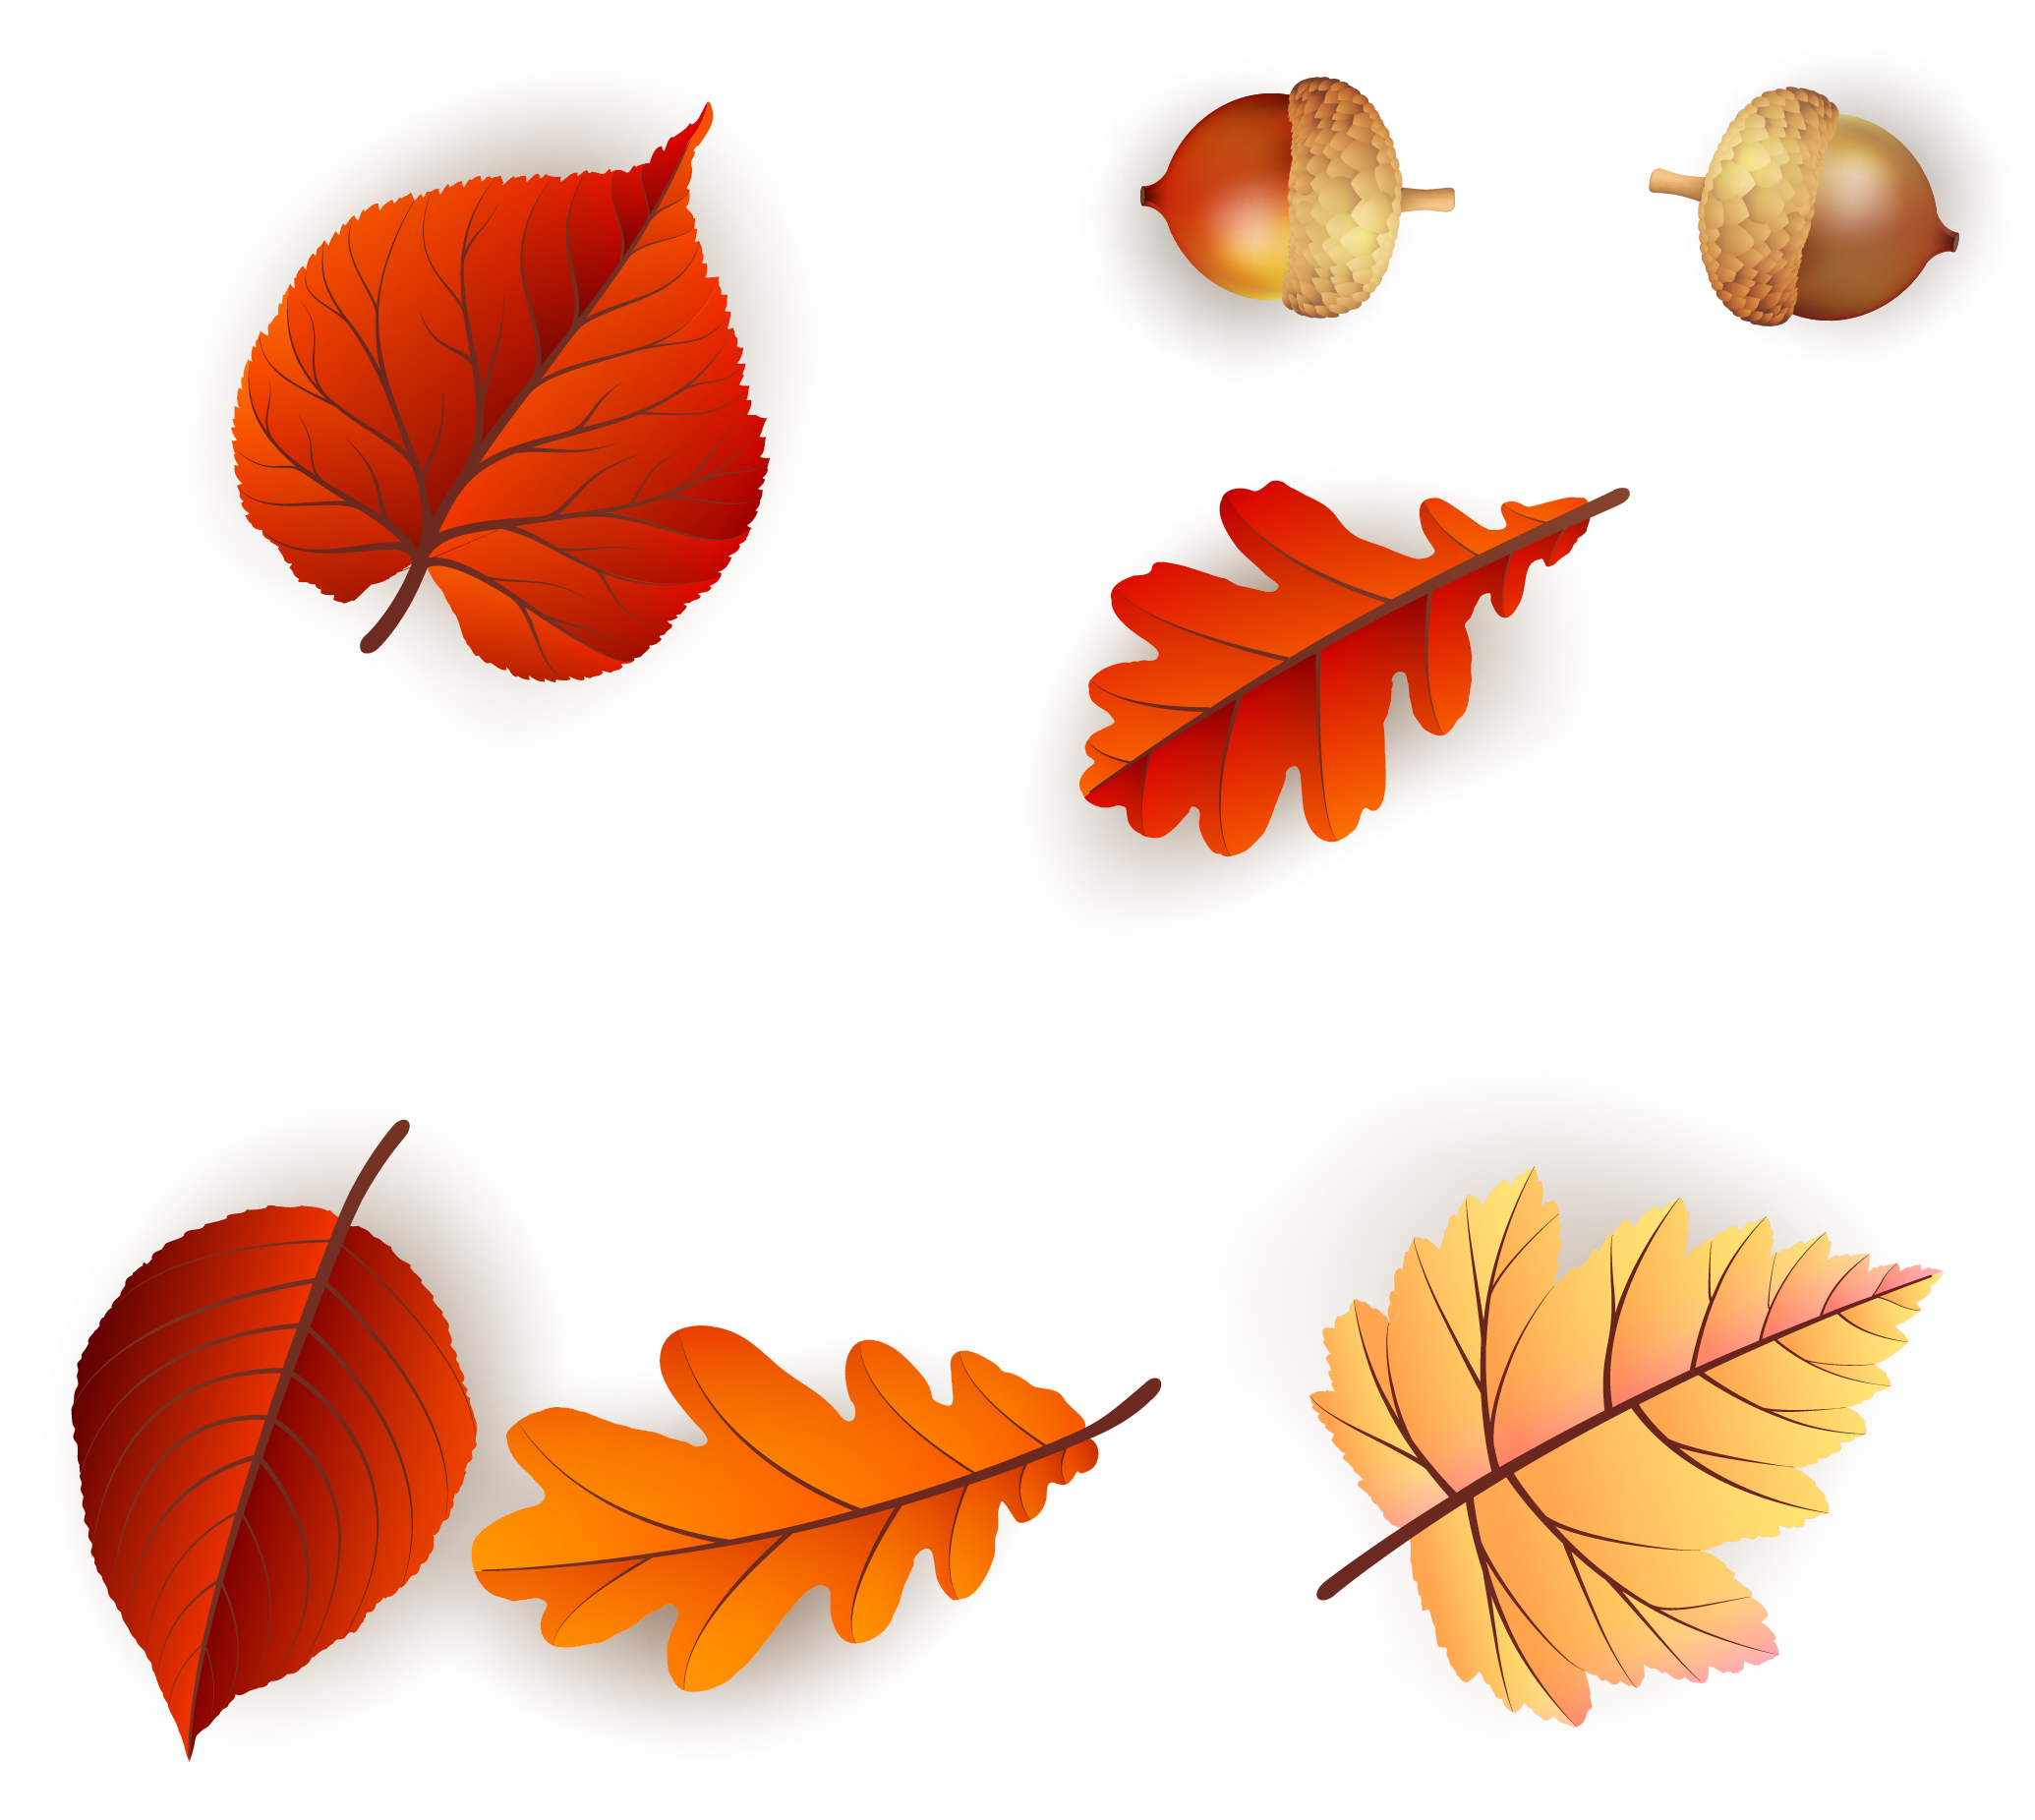 Continental Colorful Fresh Maple Leaf Pattern Vector - Continental Colorful Fresh Maple Leaf Pattern Vector (2070x1851)